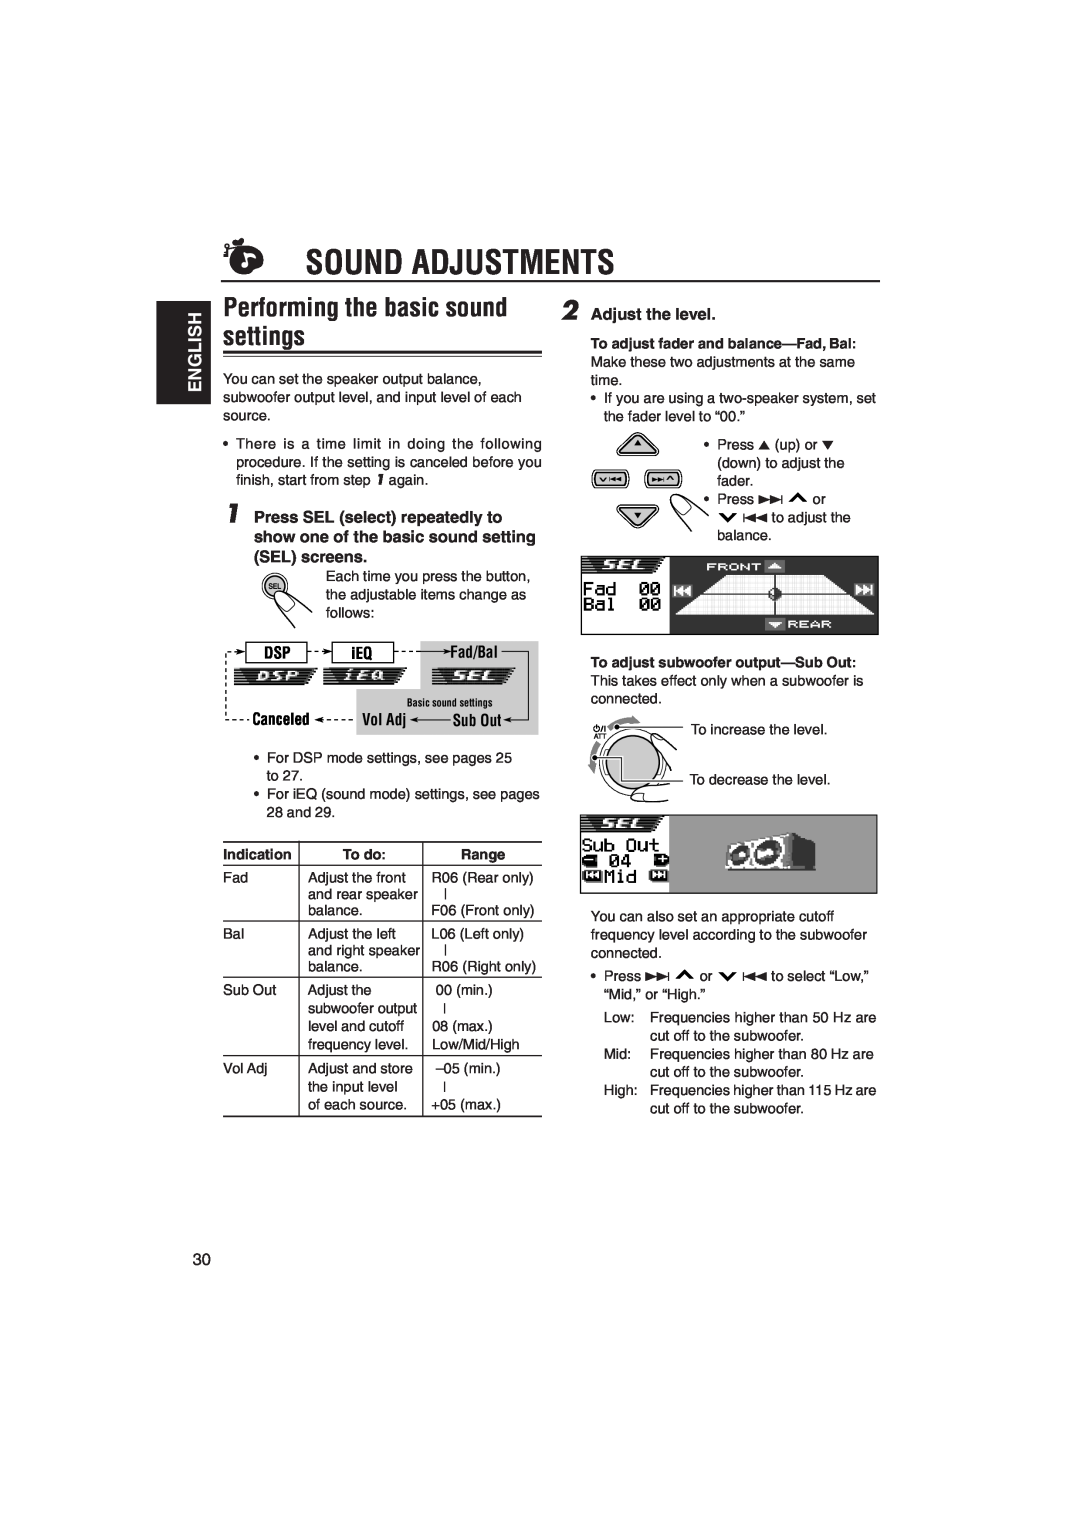 JVC KD-SH9105 Sound Adjustments, settings, Performing the basic sound, English, Adjust the level, DSP iEQ Fad/Bal, To do 